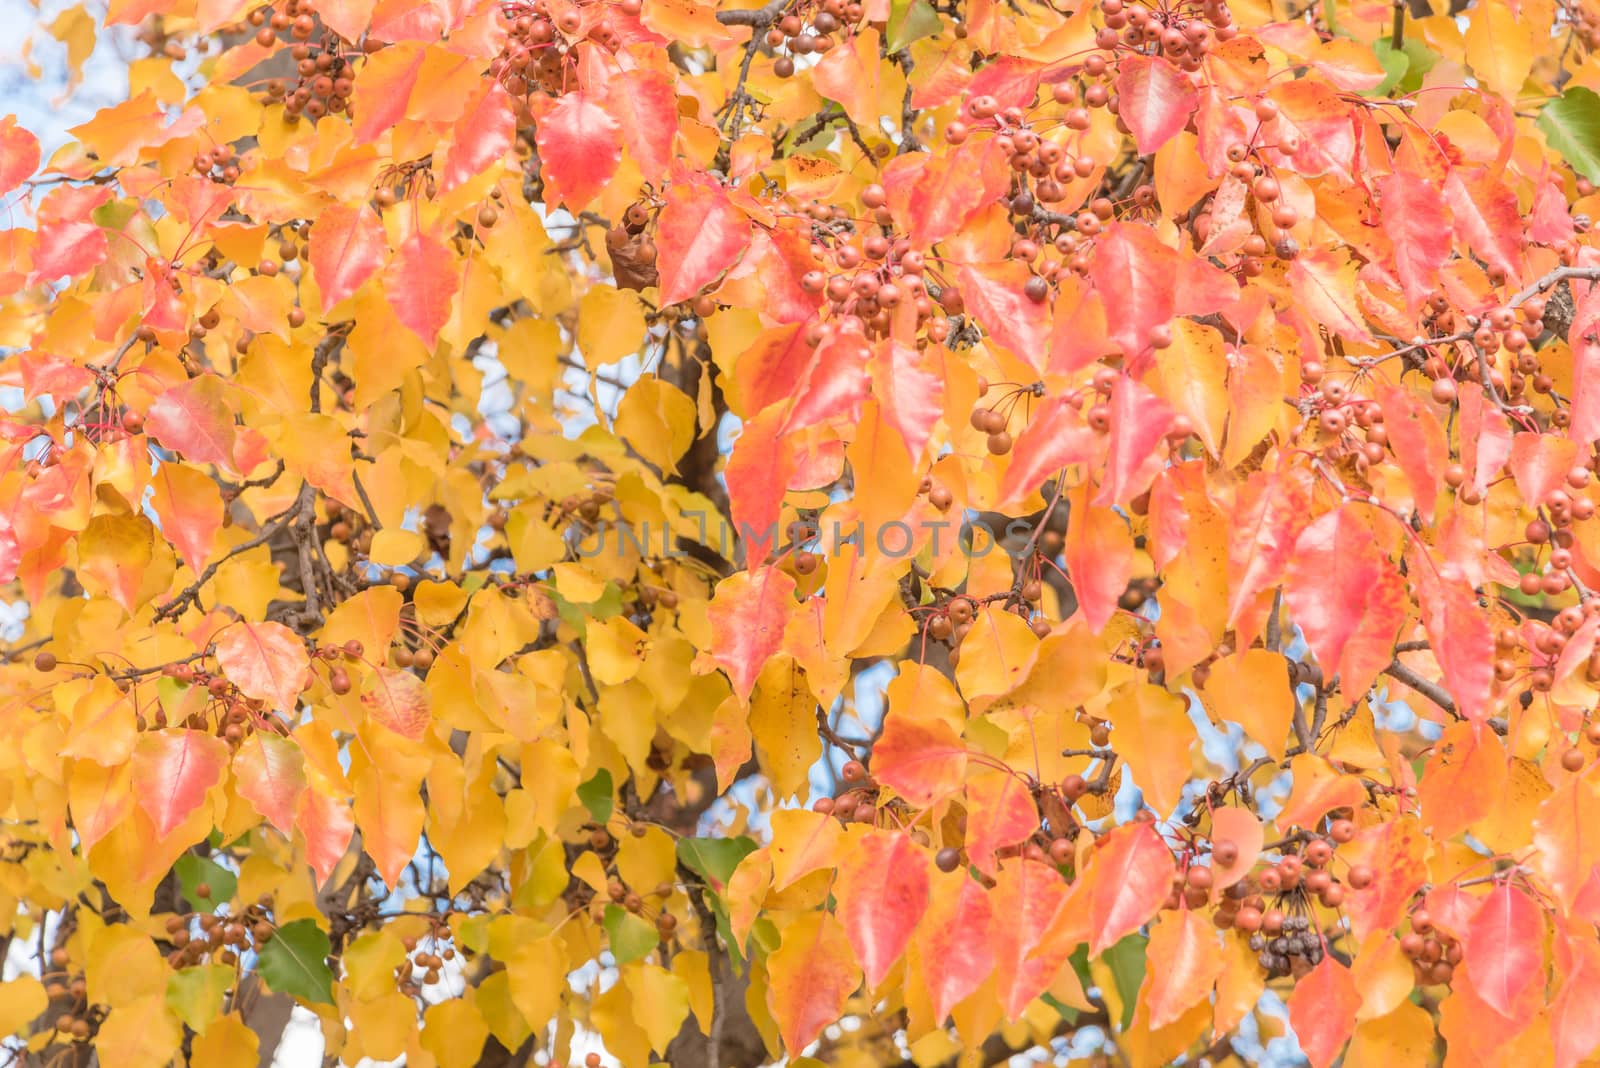 Green, orange, yellow, red fall leaves color of Bradford pear or Pyrus calleryana tree in America by trongnguyen